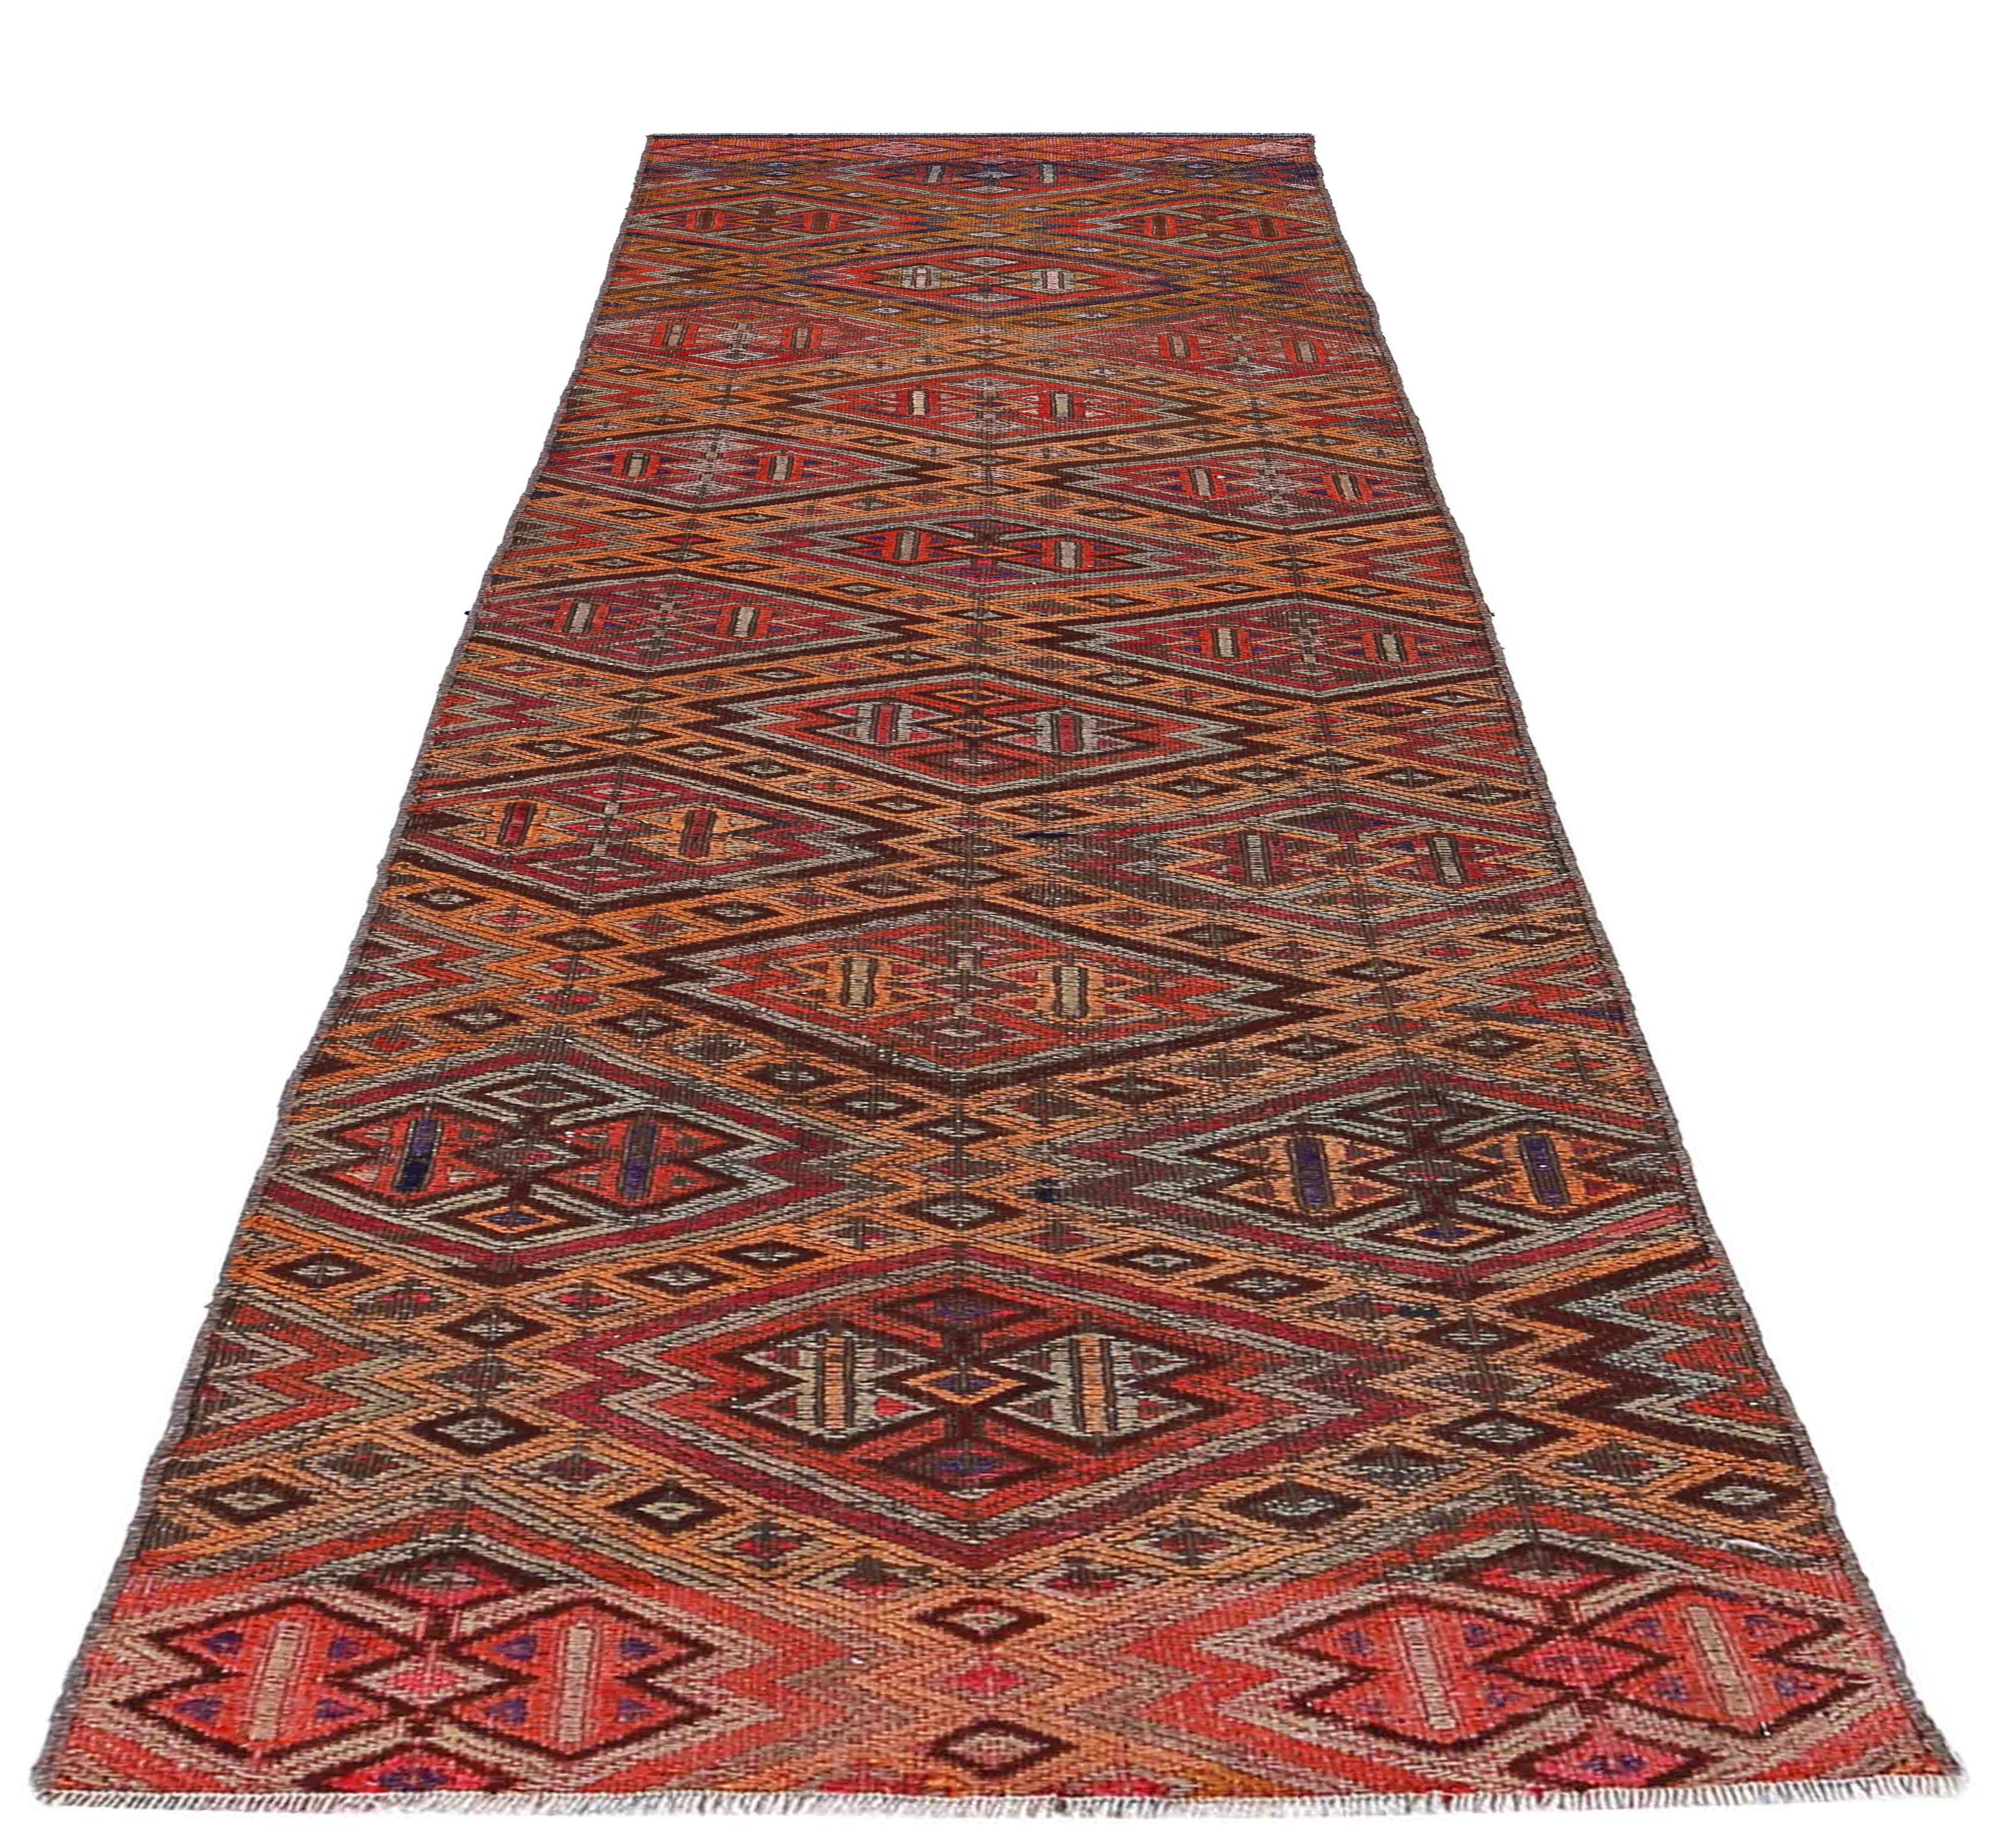 Antique Persian runner rug handwoven from the finest sheep’s wool. It’s colored with all-natural vegetable dyes that are safe for humans and pets. It’s a traditional Kilim design handwoven by expert artisans. It’s a lovely runner rug that can be